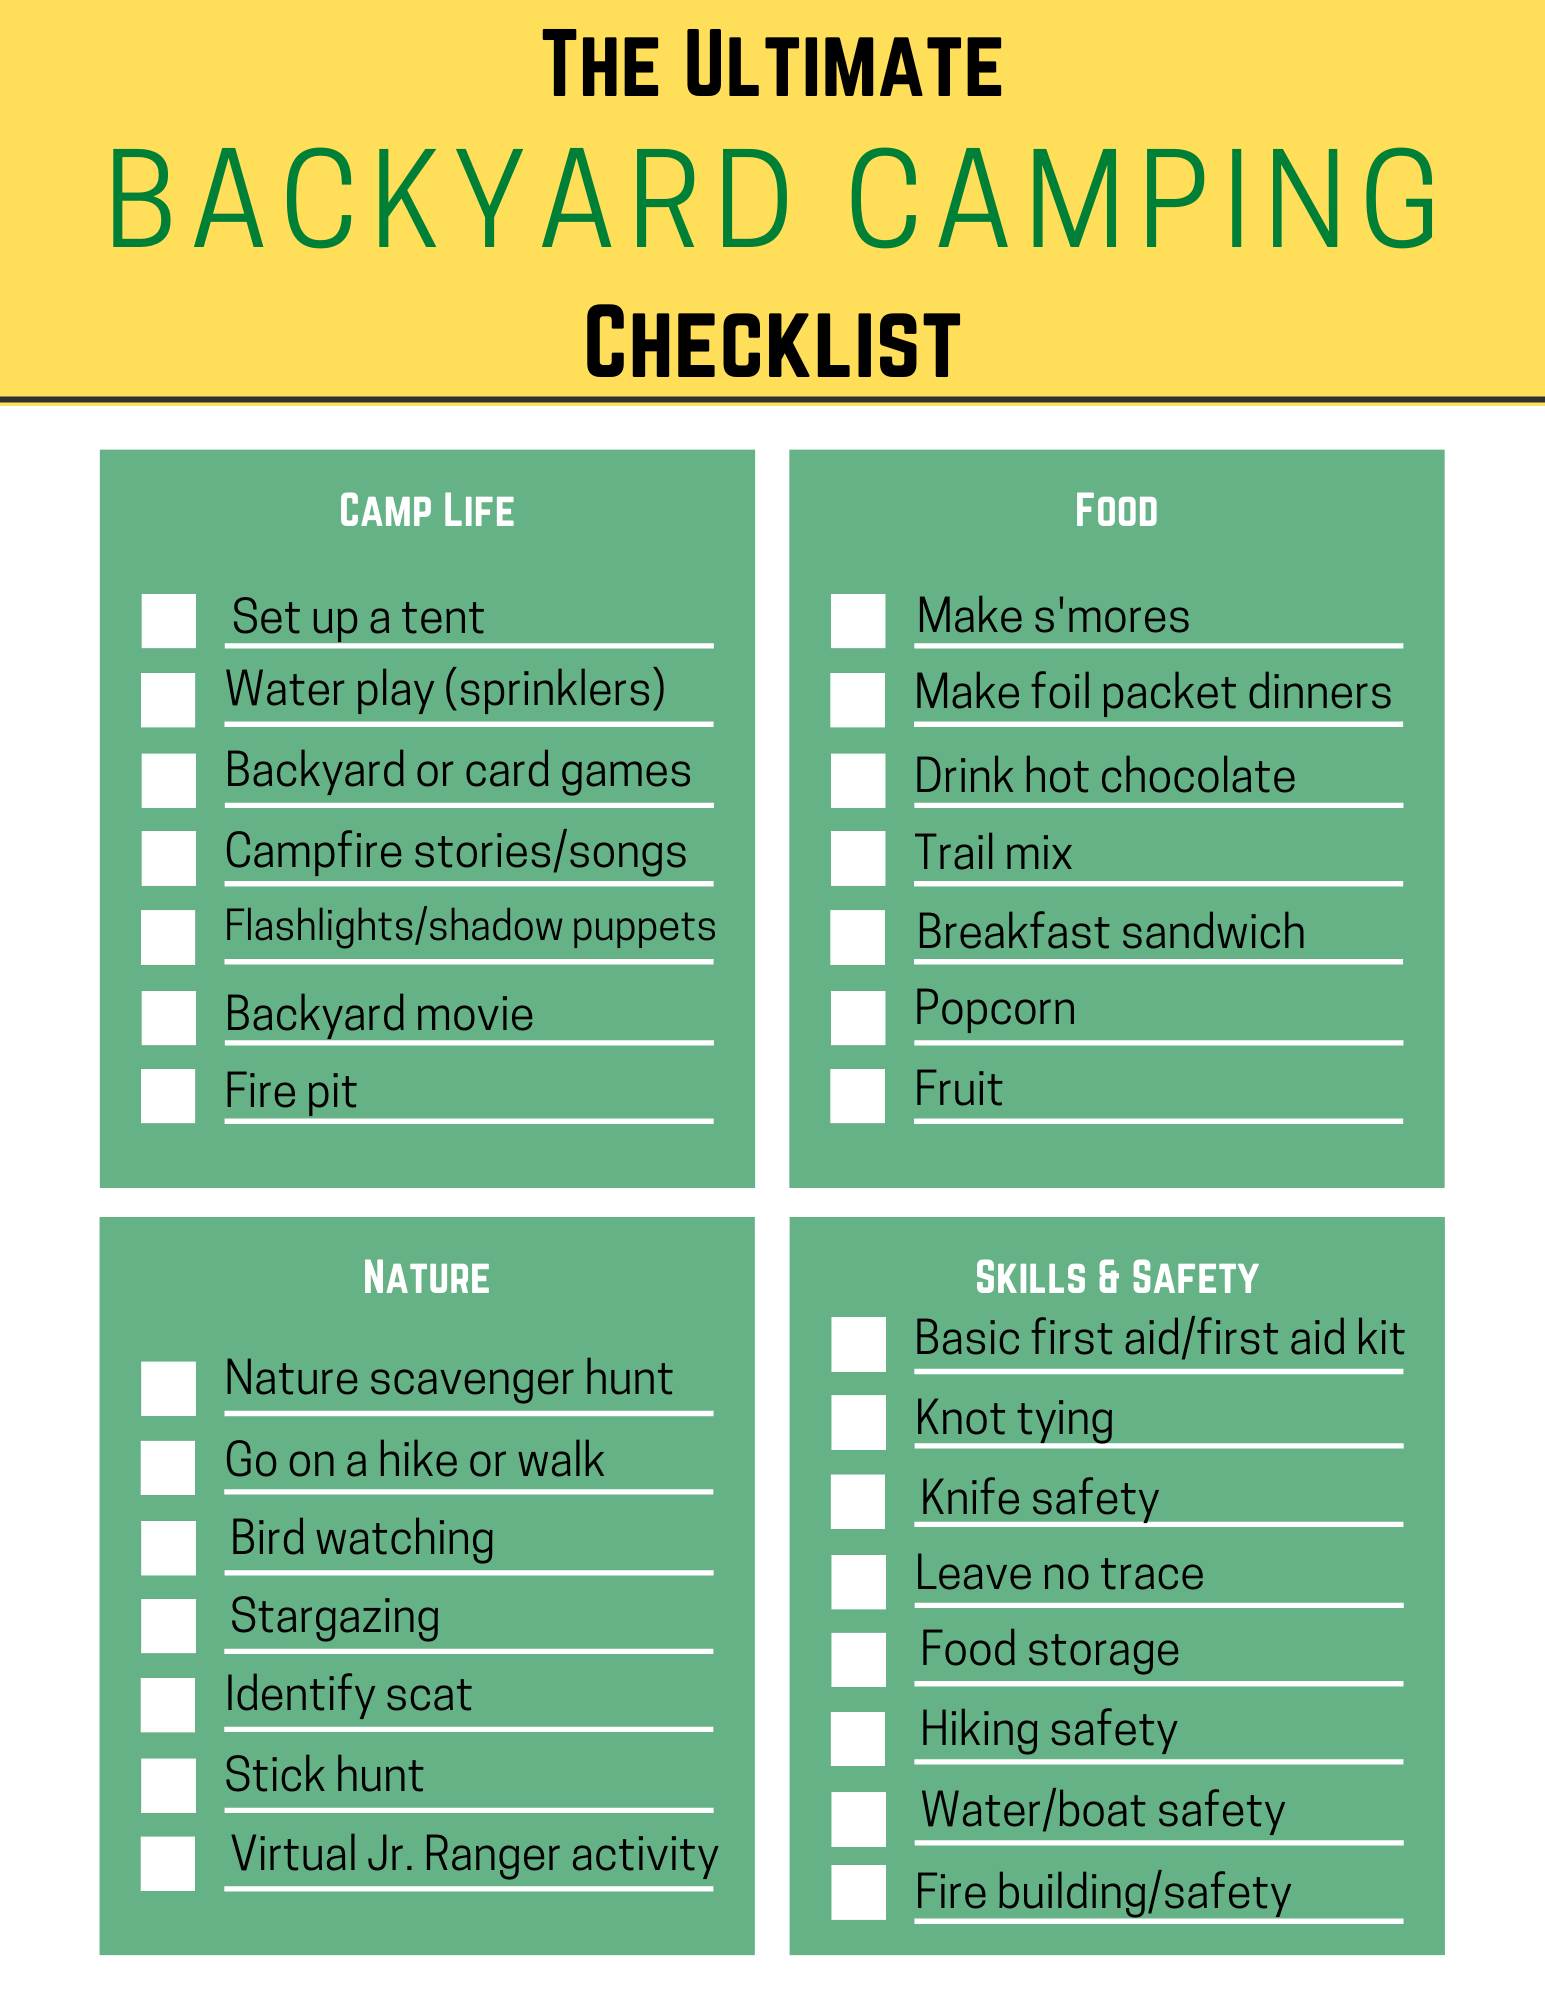 The Ultimate Camping Checklist (33 Essential Items)